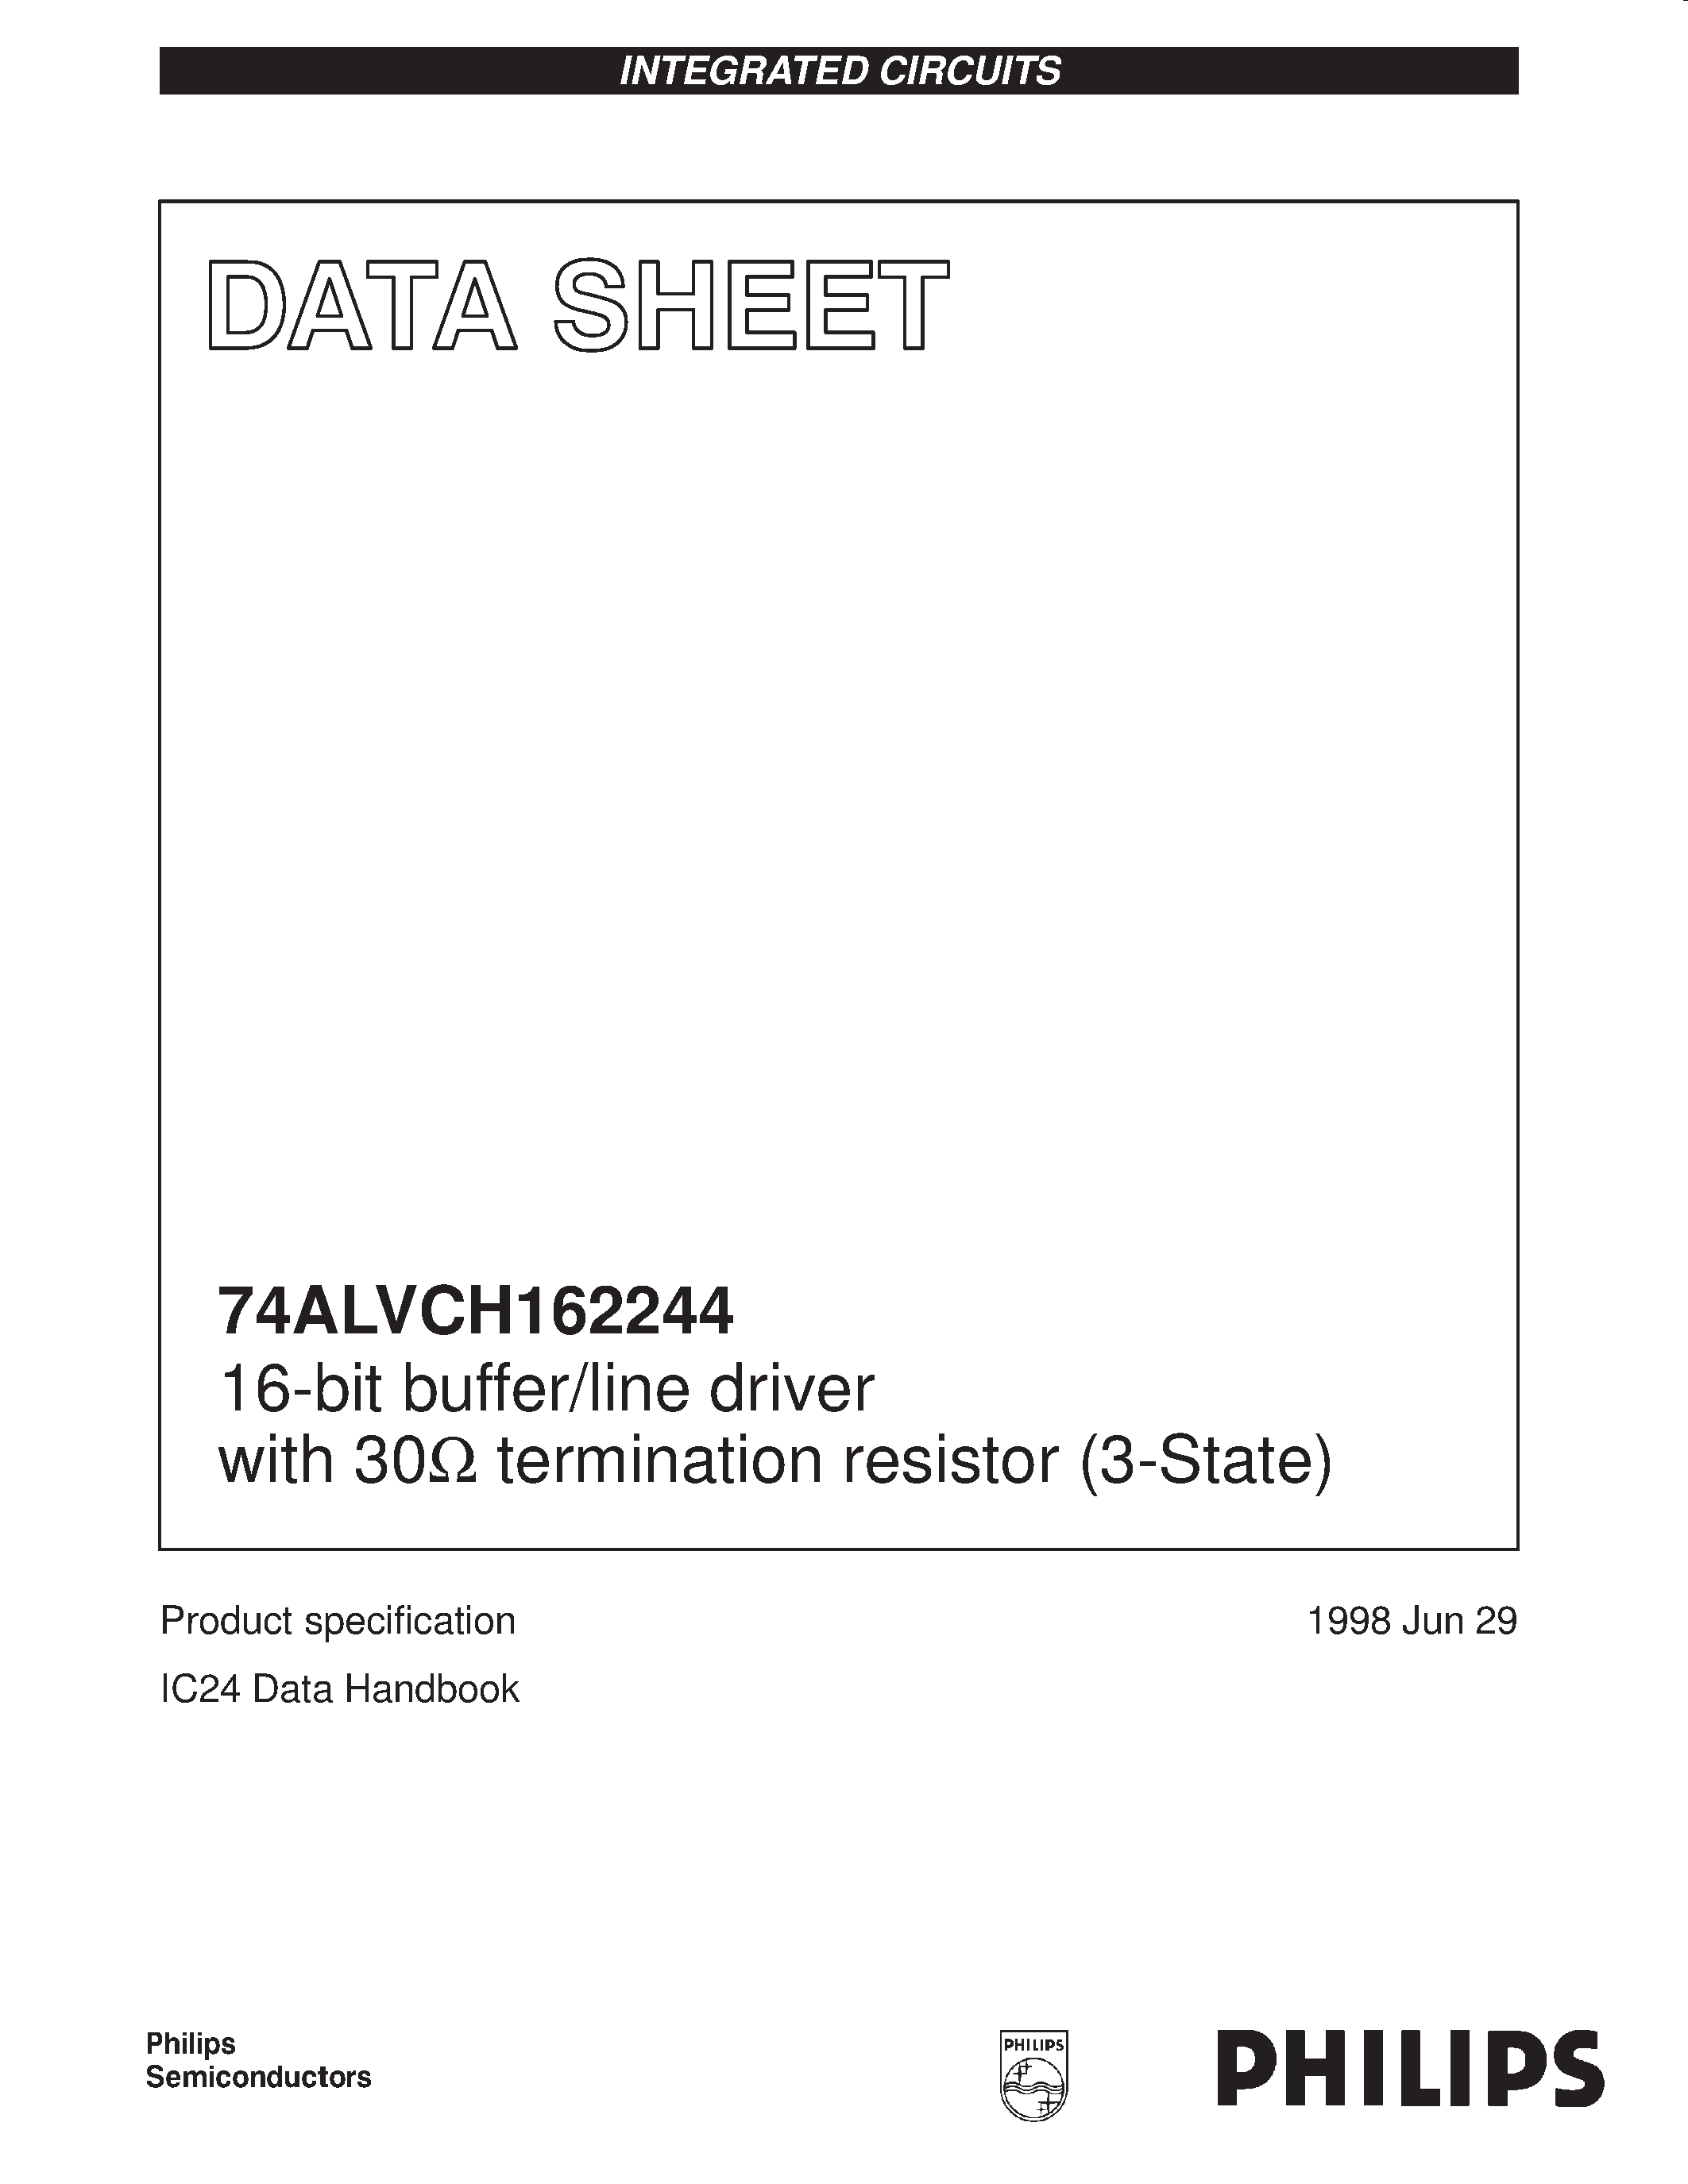 Datasheet 74ALVCH162244 - 16-bit buffer/line driver with 30ohm termination resistor 3-State page 1